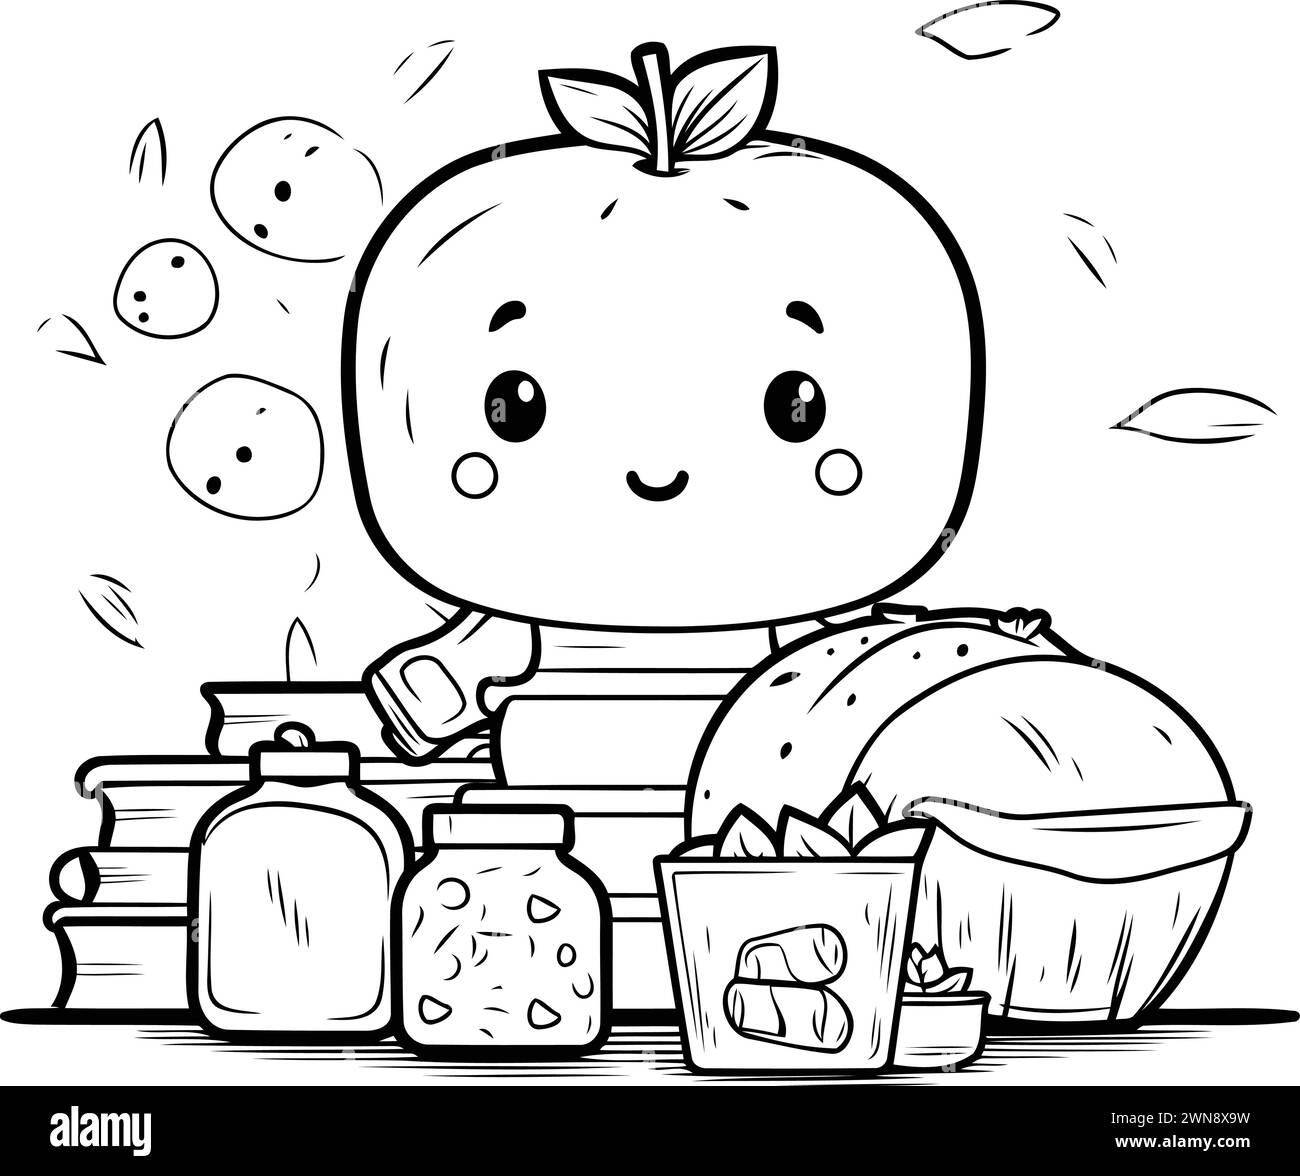 Cartoon Illustration of Cute Apple Character for Coloring Book Stock Vector